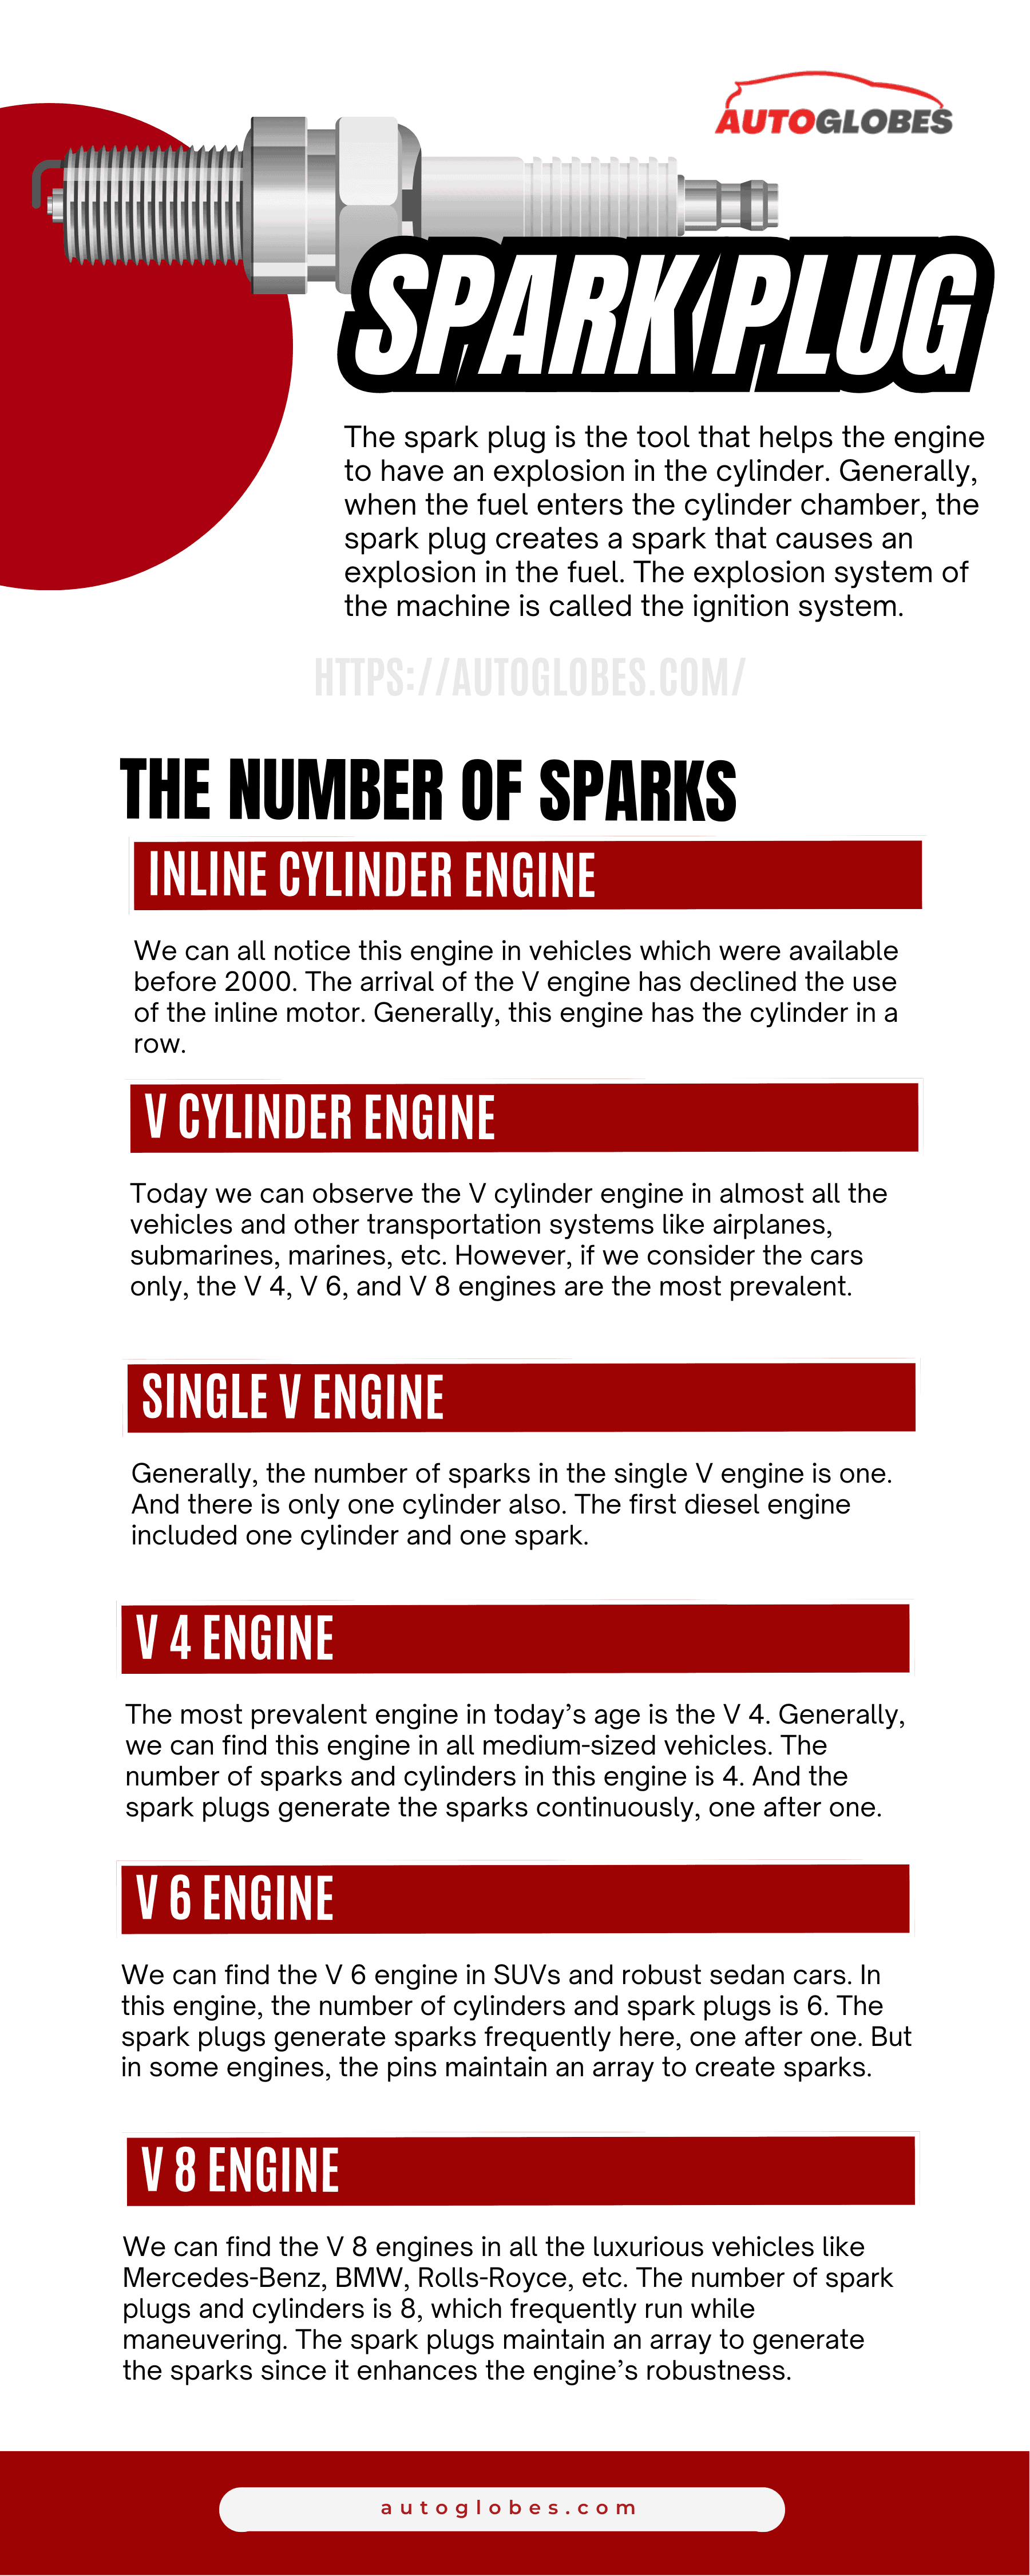 How Many Spark Plugs Does A Diesel Have_ Infographic